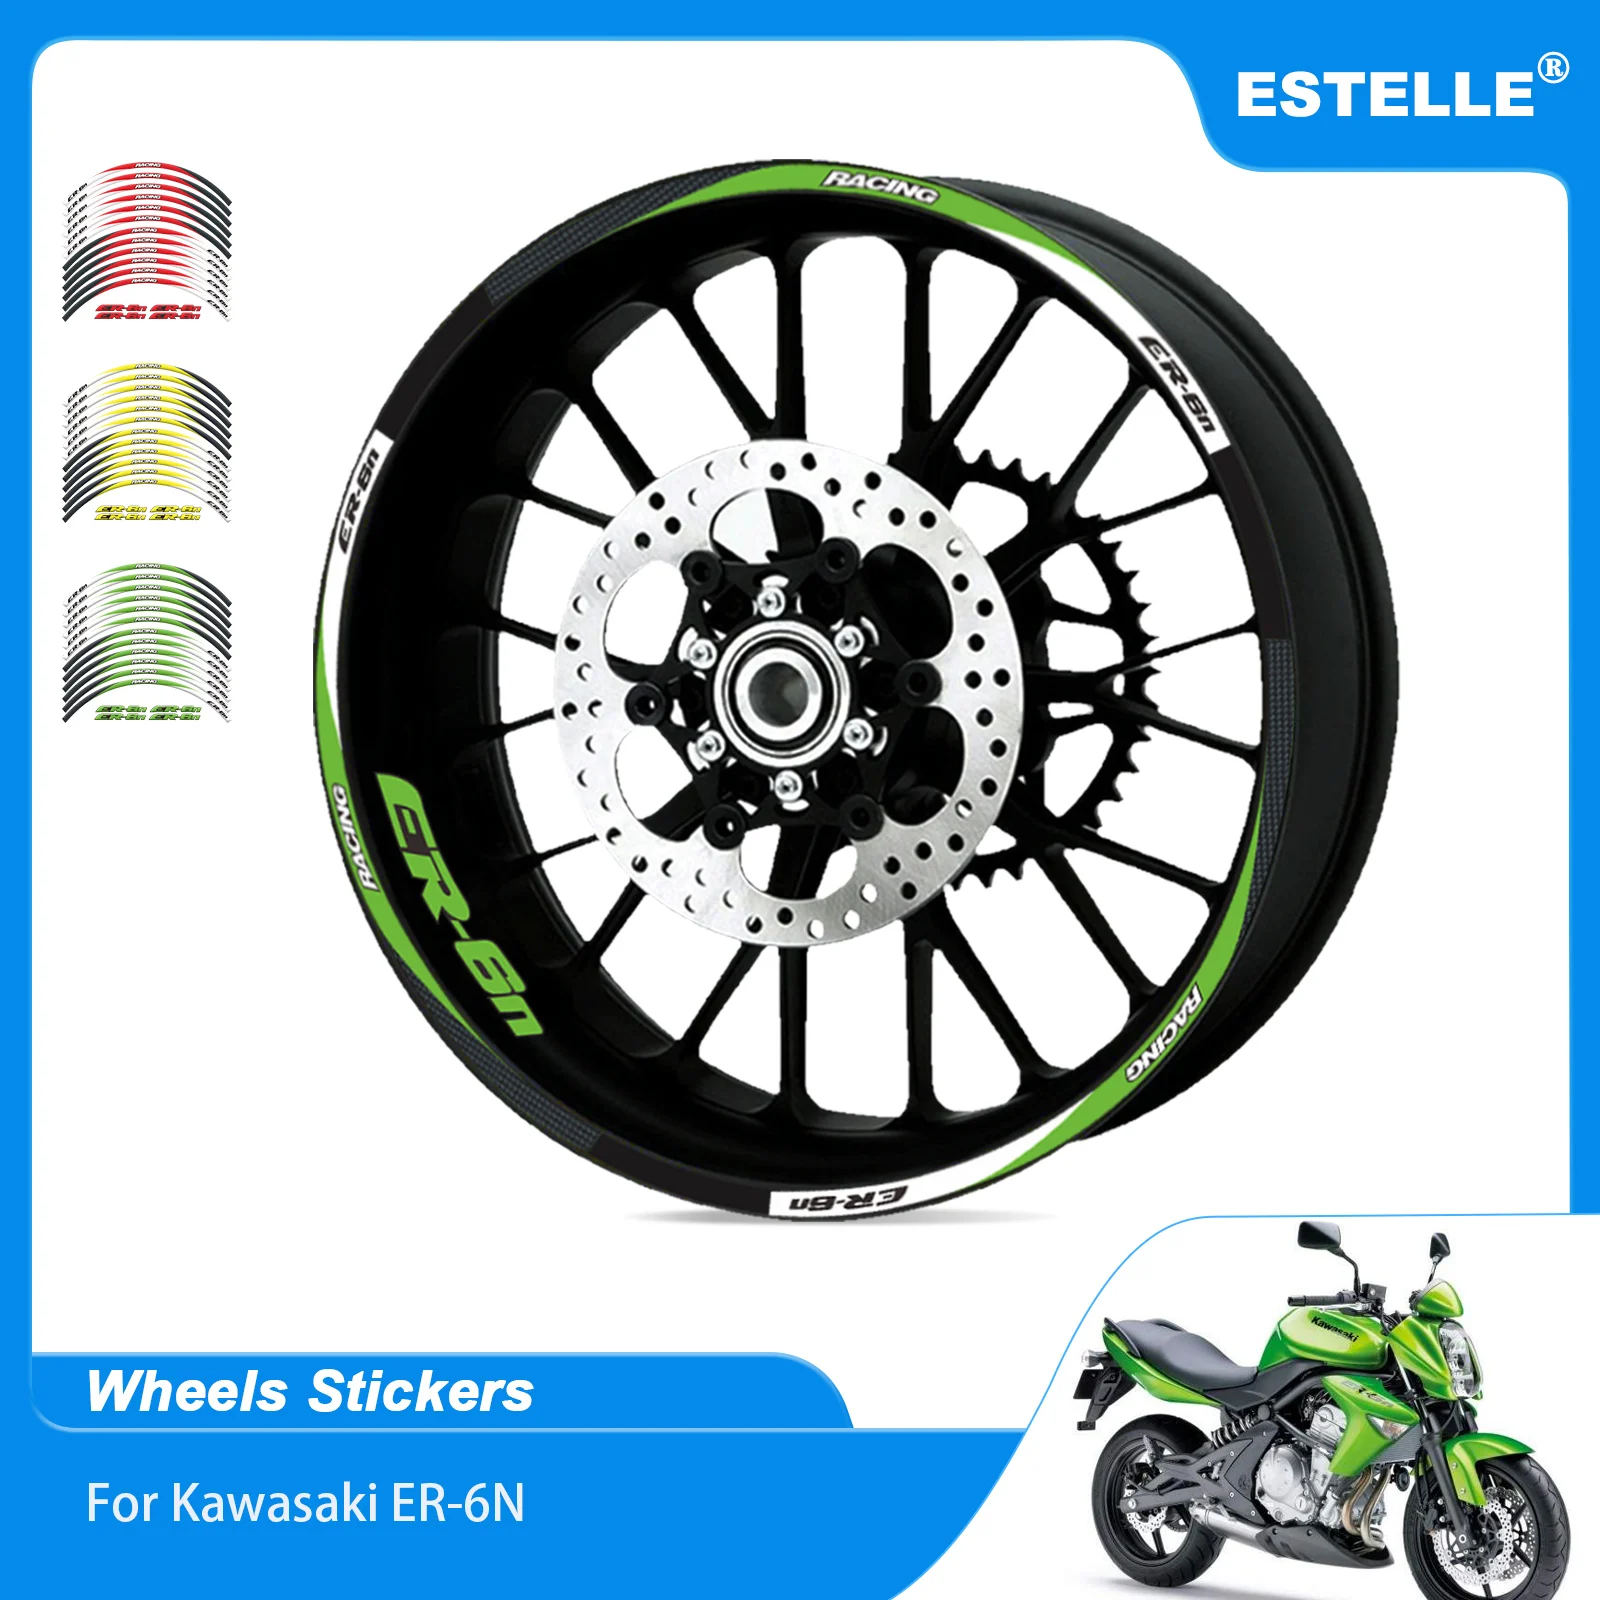 

Hot Motorcycle decal Outer Wheel Rim Stickers Tire Film Border Reflective Decals Tire Decoration For Kawasaki ER-6N All Years